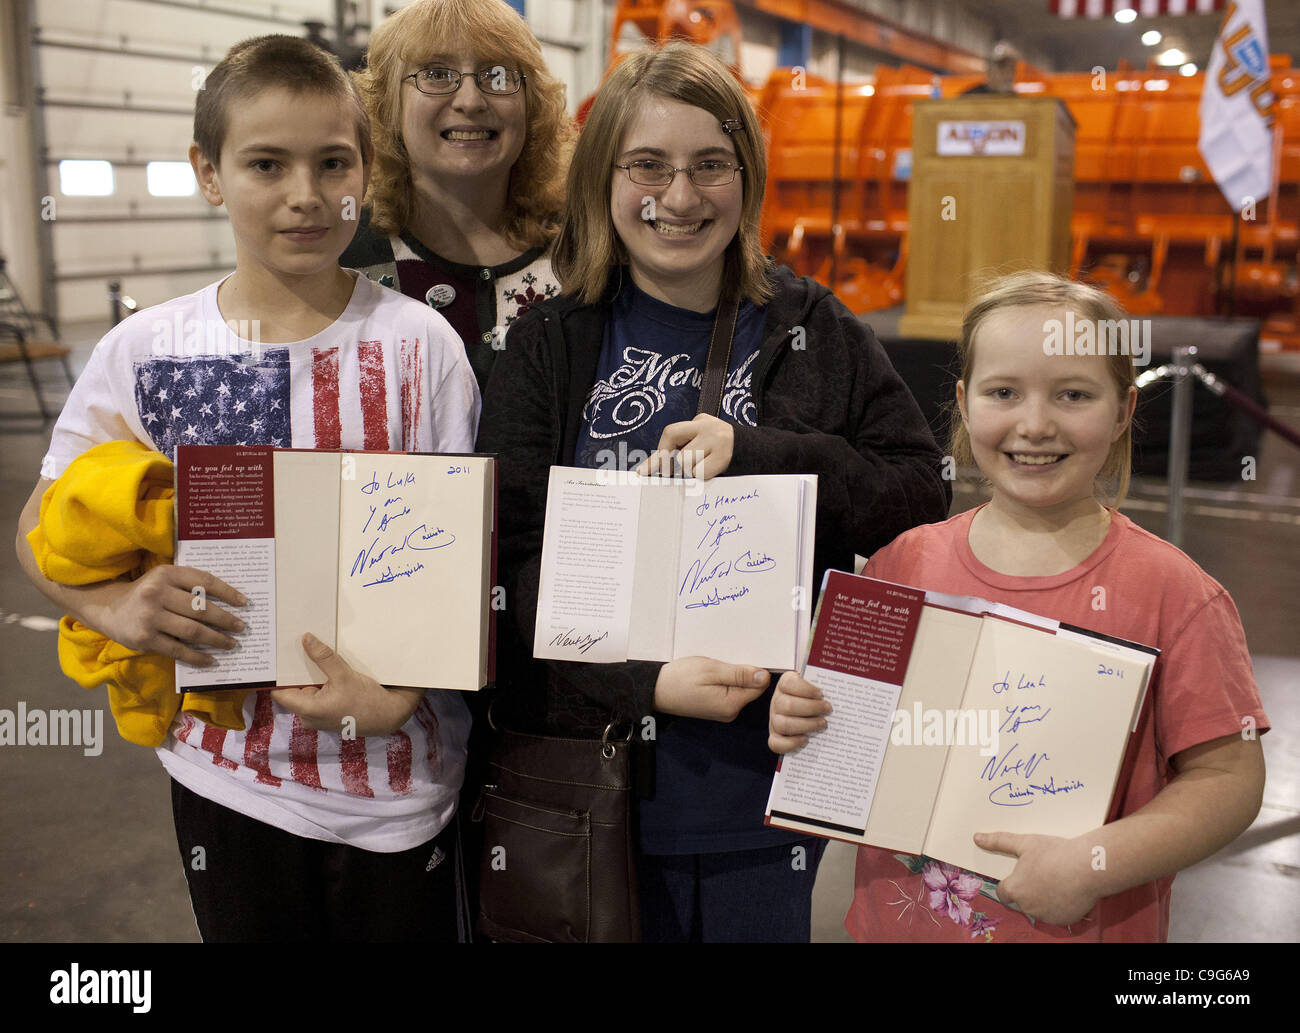 Dec. 20, 2011 - Ottumwa, IA, USA - Constance Cavanaugh (2nd L), with her (home-schooled) children Luke (14yo), Hanah (15yo) and Lea (8yo), pose with books signed by former House Speaker Newt Gingrich who spoke to employees of the AlJon Company in Ottumwa, Iowa. (Credit Image: © James Colburn/ZUMAPRE Stock Photo